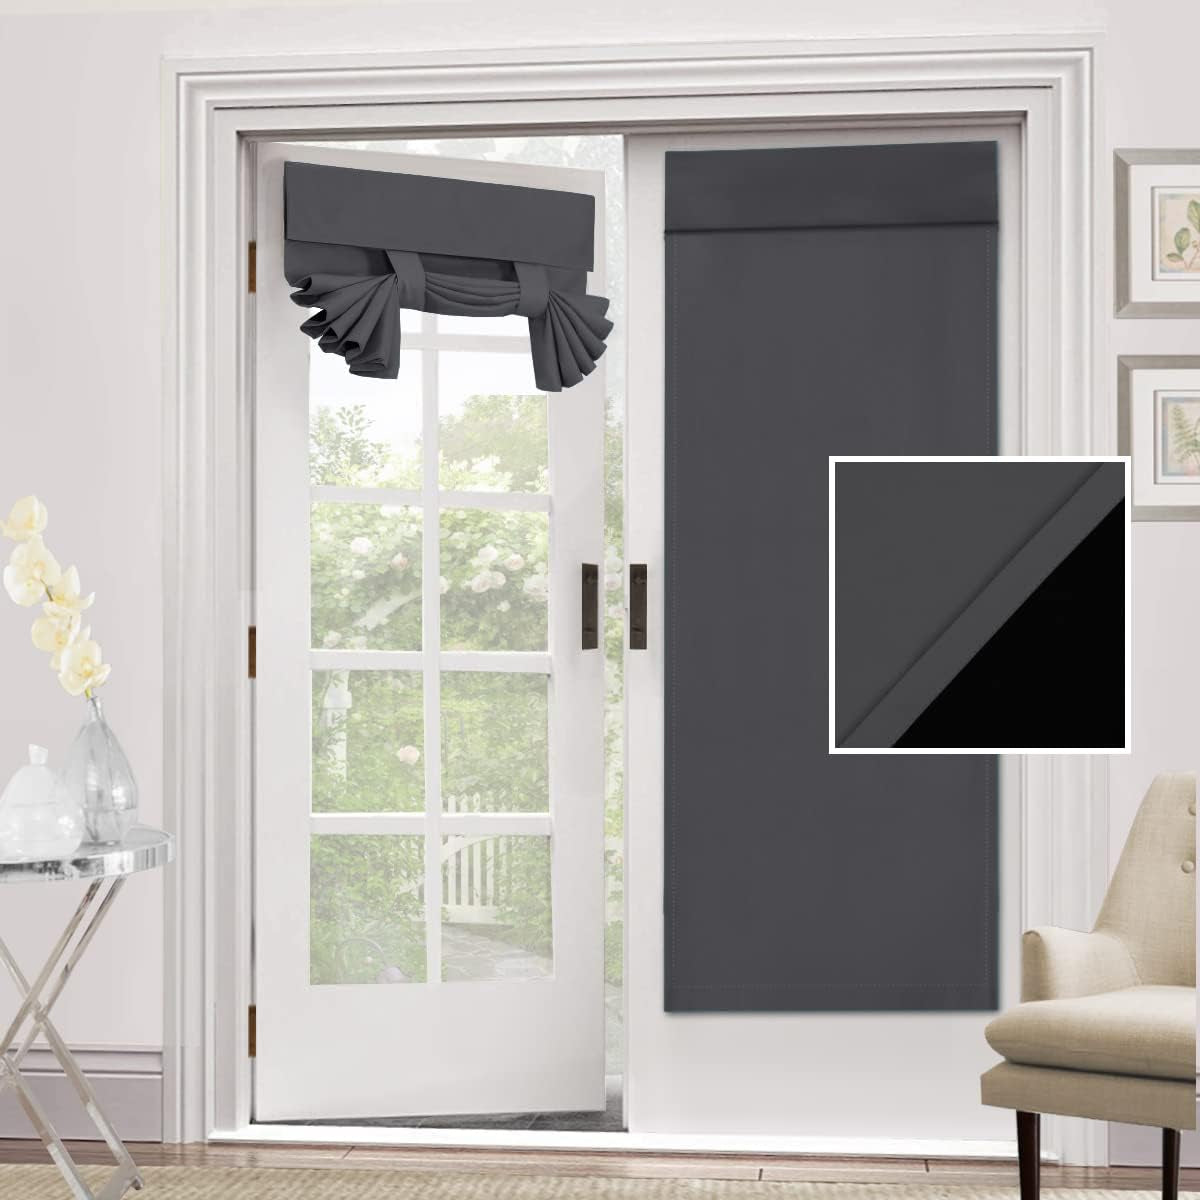 H.VERSAILTEX 100% Blackout Door Curtain - Small French Door Curtains for Doors Window, Thermal Insulated Adhesive Tricia Door Curtain, 26X40 Inches, 1 Panel, Pumice Stone  H.VERSAILTEX Charcoal Grey 26"W X 68"L 